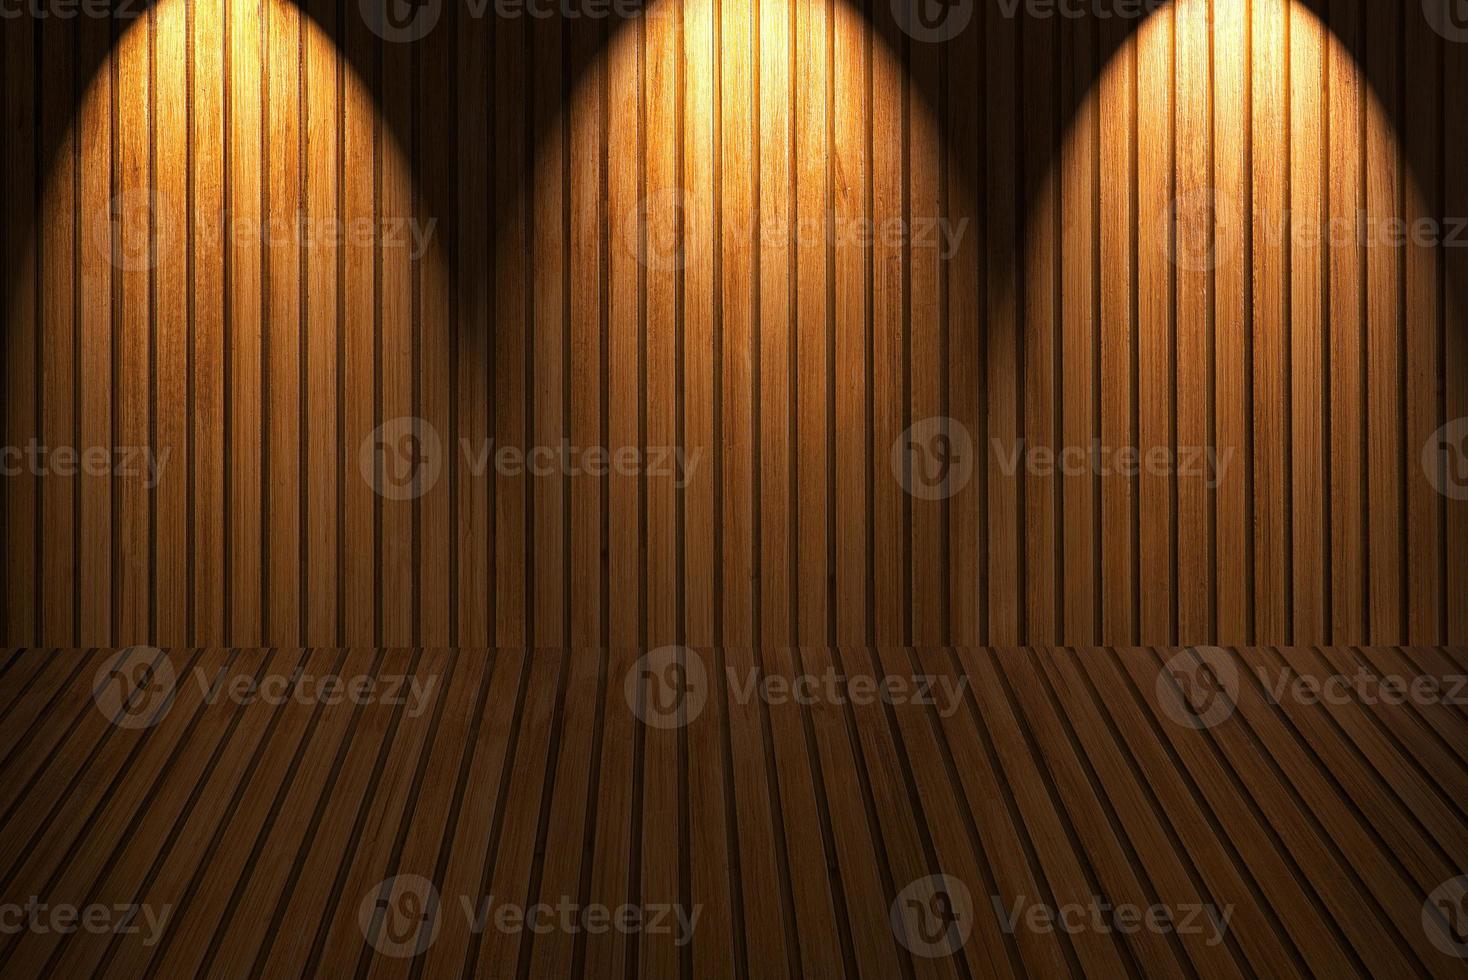 Wooden floor and wall photo